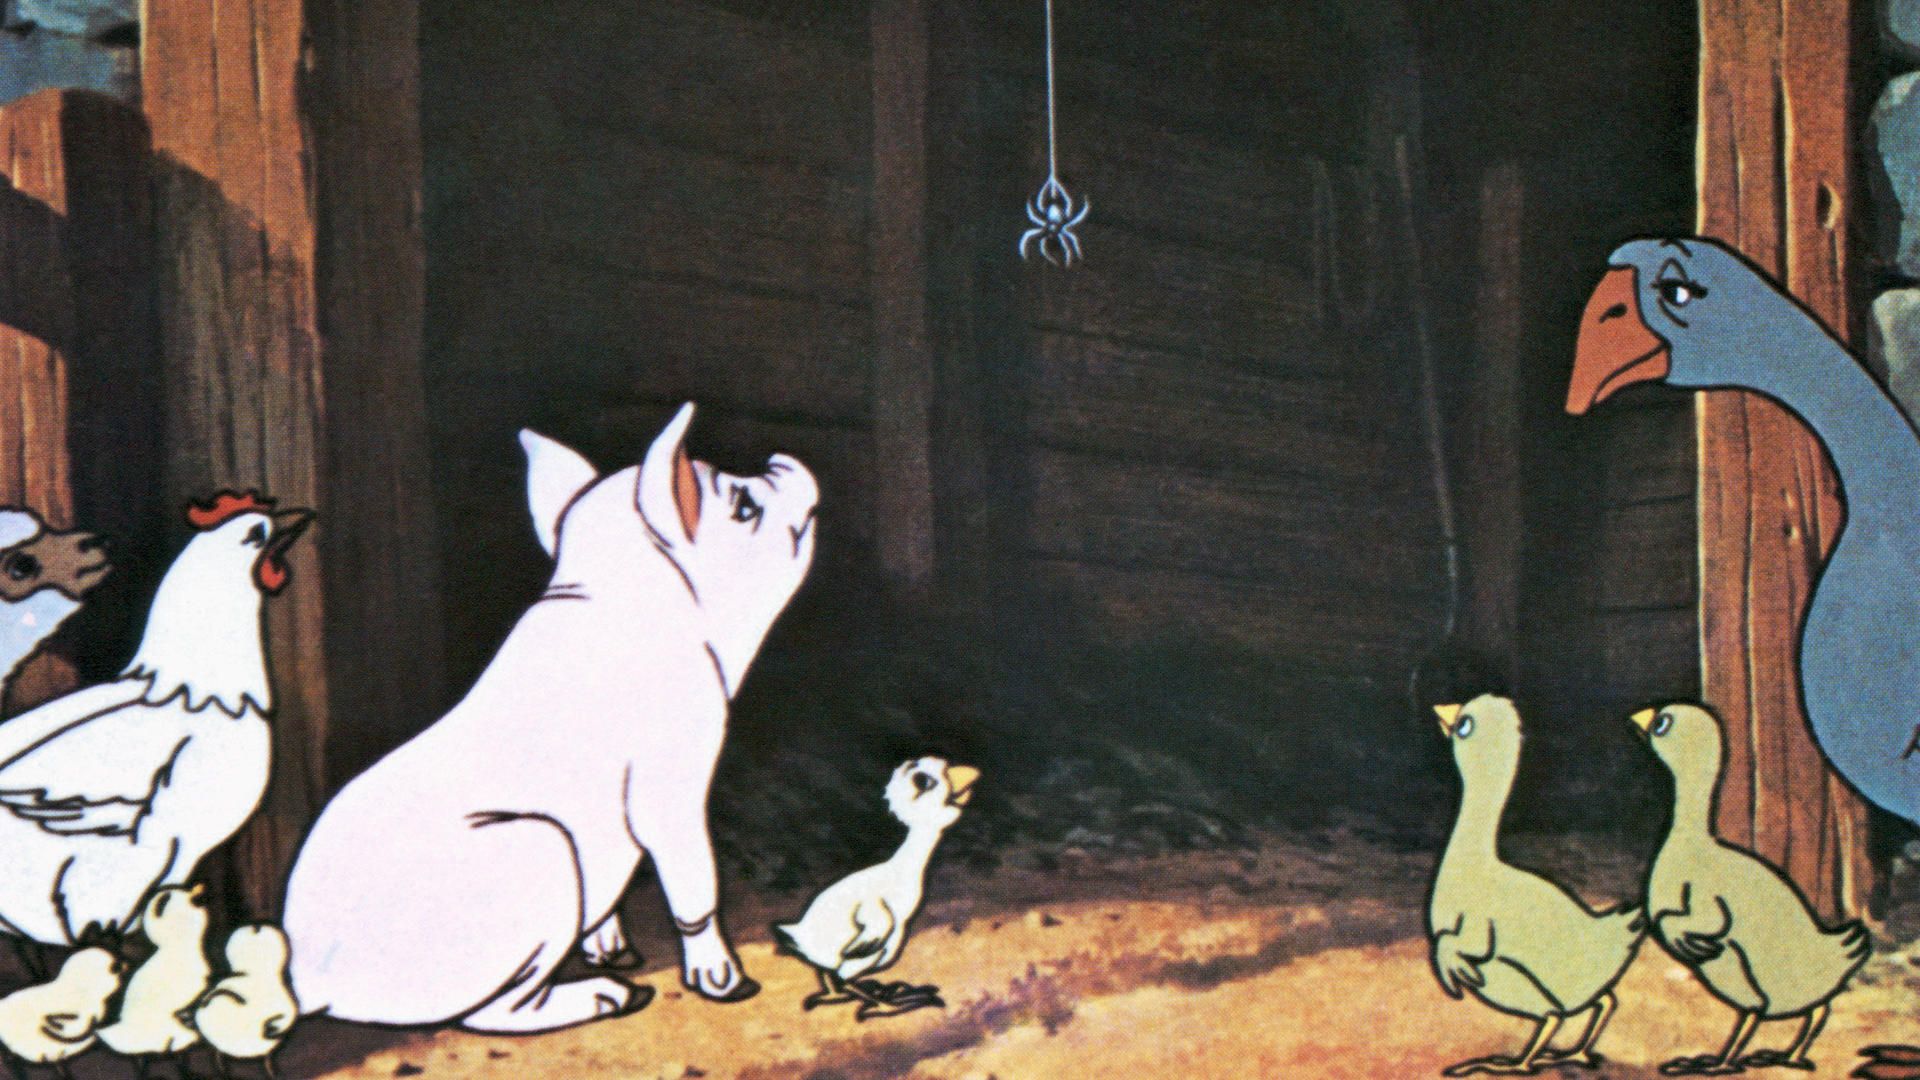 <p>                     This 1973 musical adaptation of a best-selling children’s book by EB White is an adorable family movie featuring a runtish pig called Wilbur who is snubbed by the other farmyard animals. He is left fearing his end on a dinner table until hatching a plan with Charlotte, a spider, to save him. There is also a 2006 version, with better animation, but the 70s movie is particularly charming.                   </p>